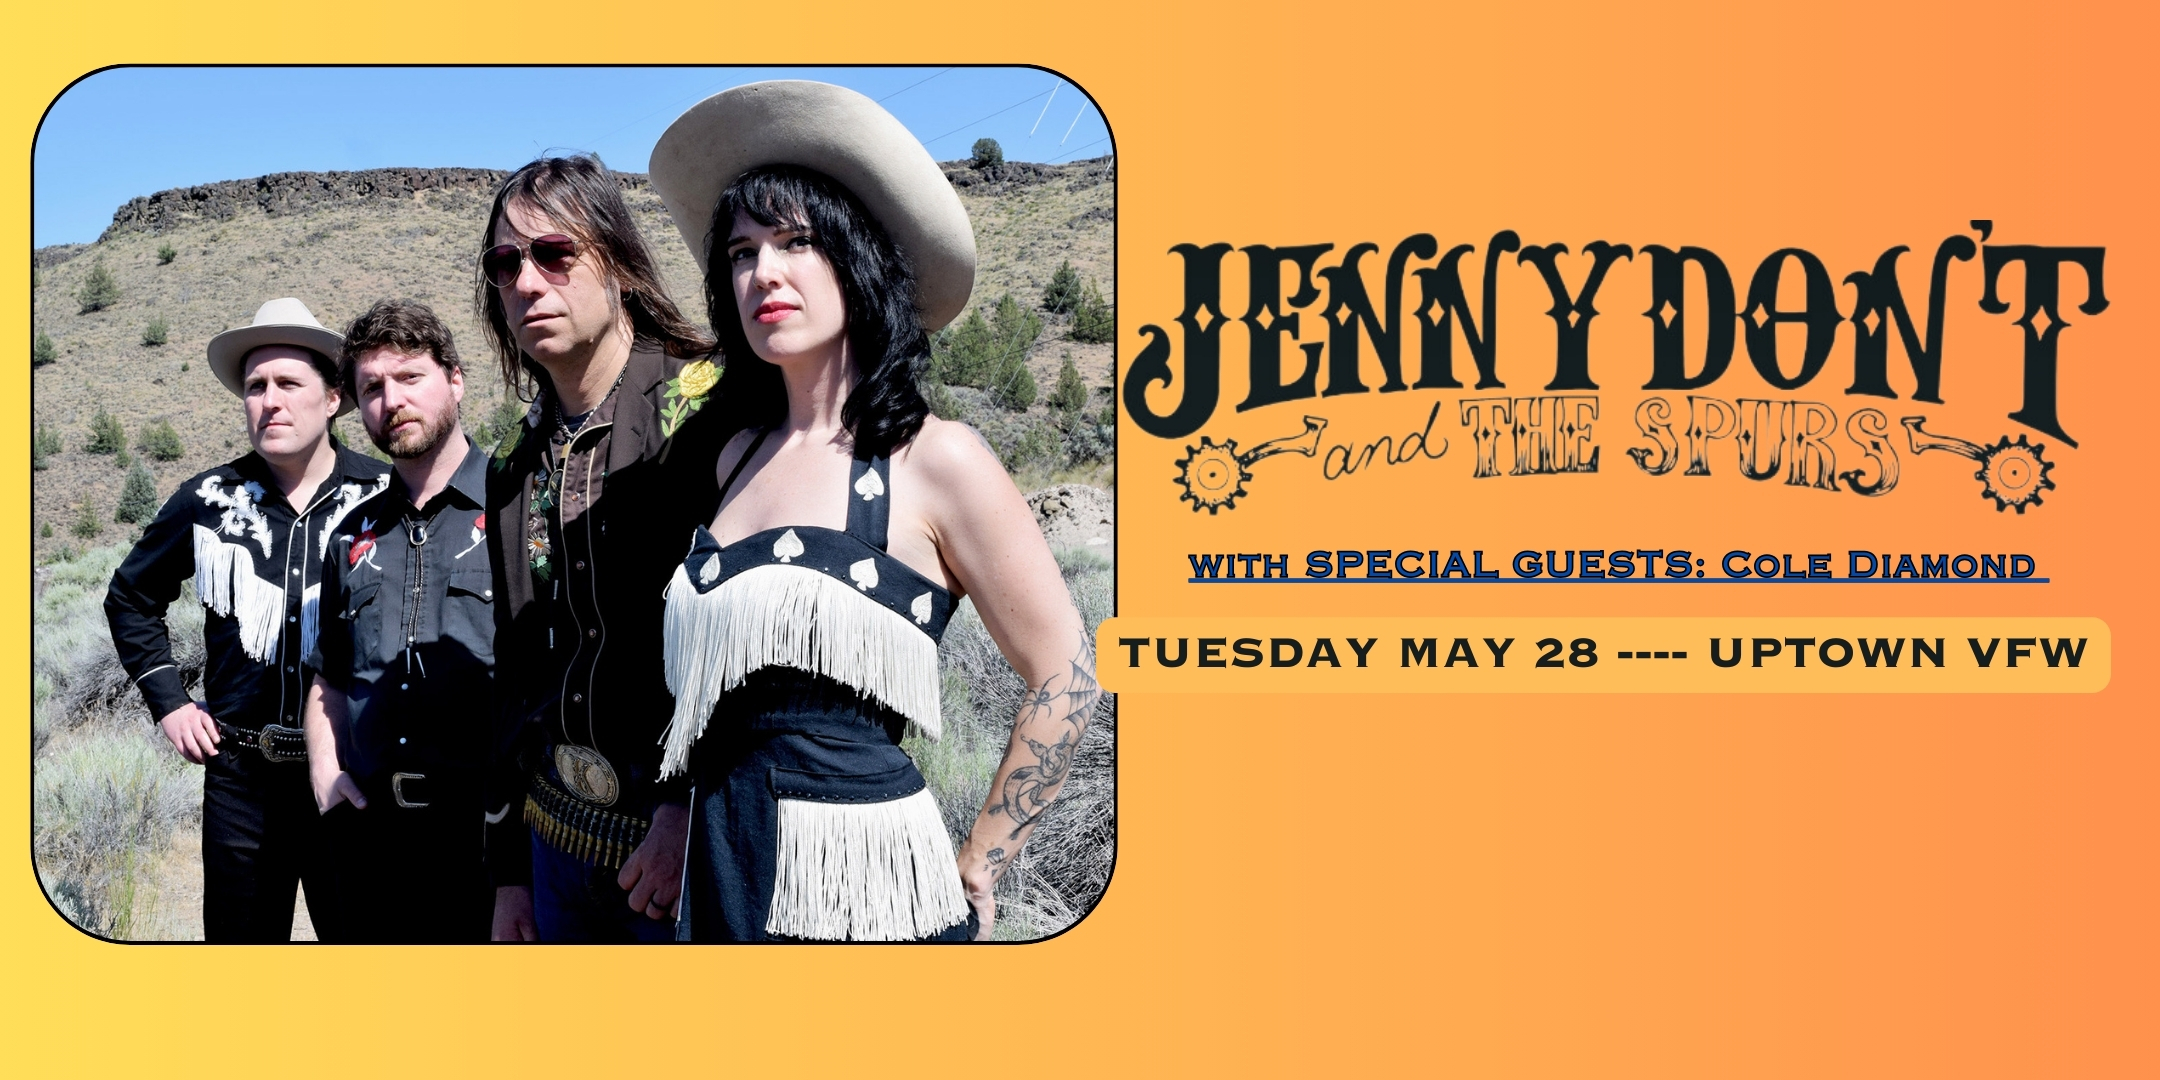 Jenny Don't and the Spurs with special guests Cole Diamond Tuesday May 28 James Ballentine “Uptown” VFW Post 246 Doors 7:30pm :: Music 8:00pm :: 21+ GA $15 ADV / $20 DOS Tickets On Sale Now